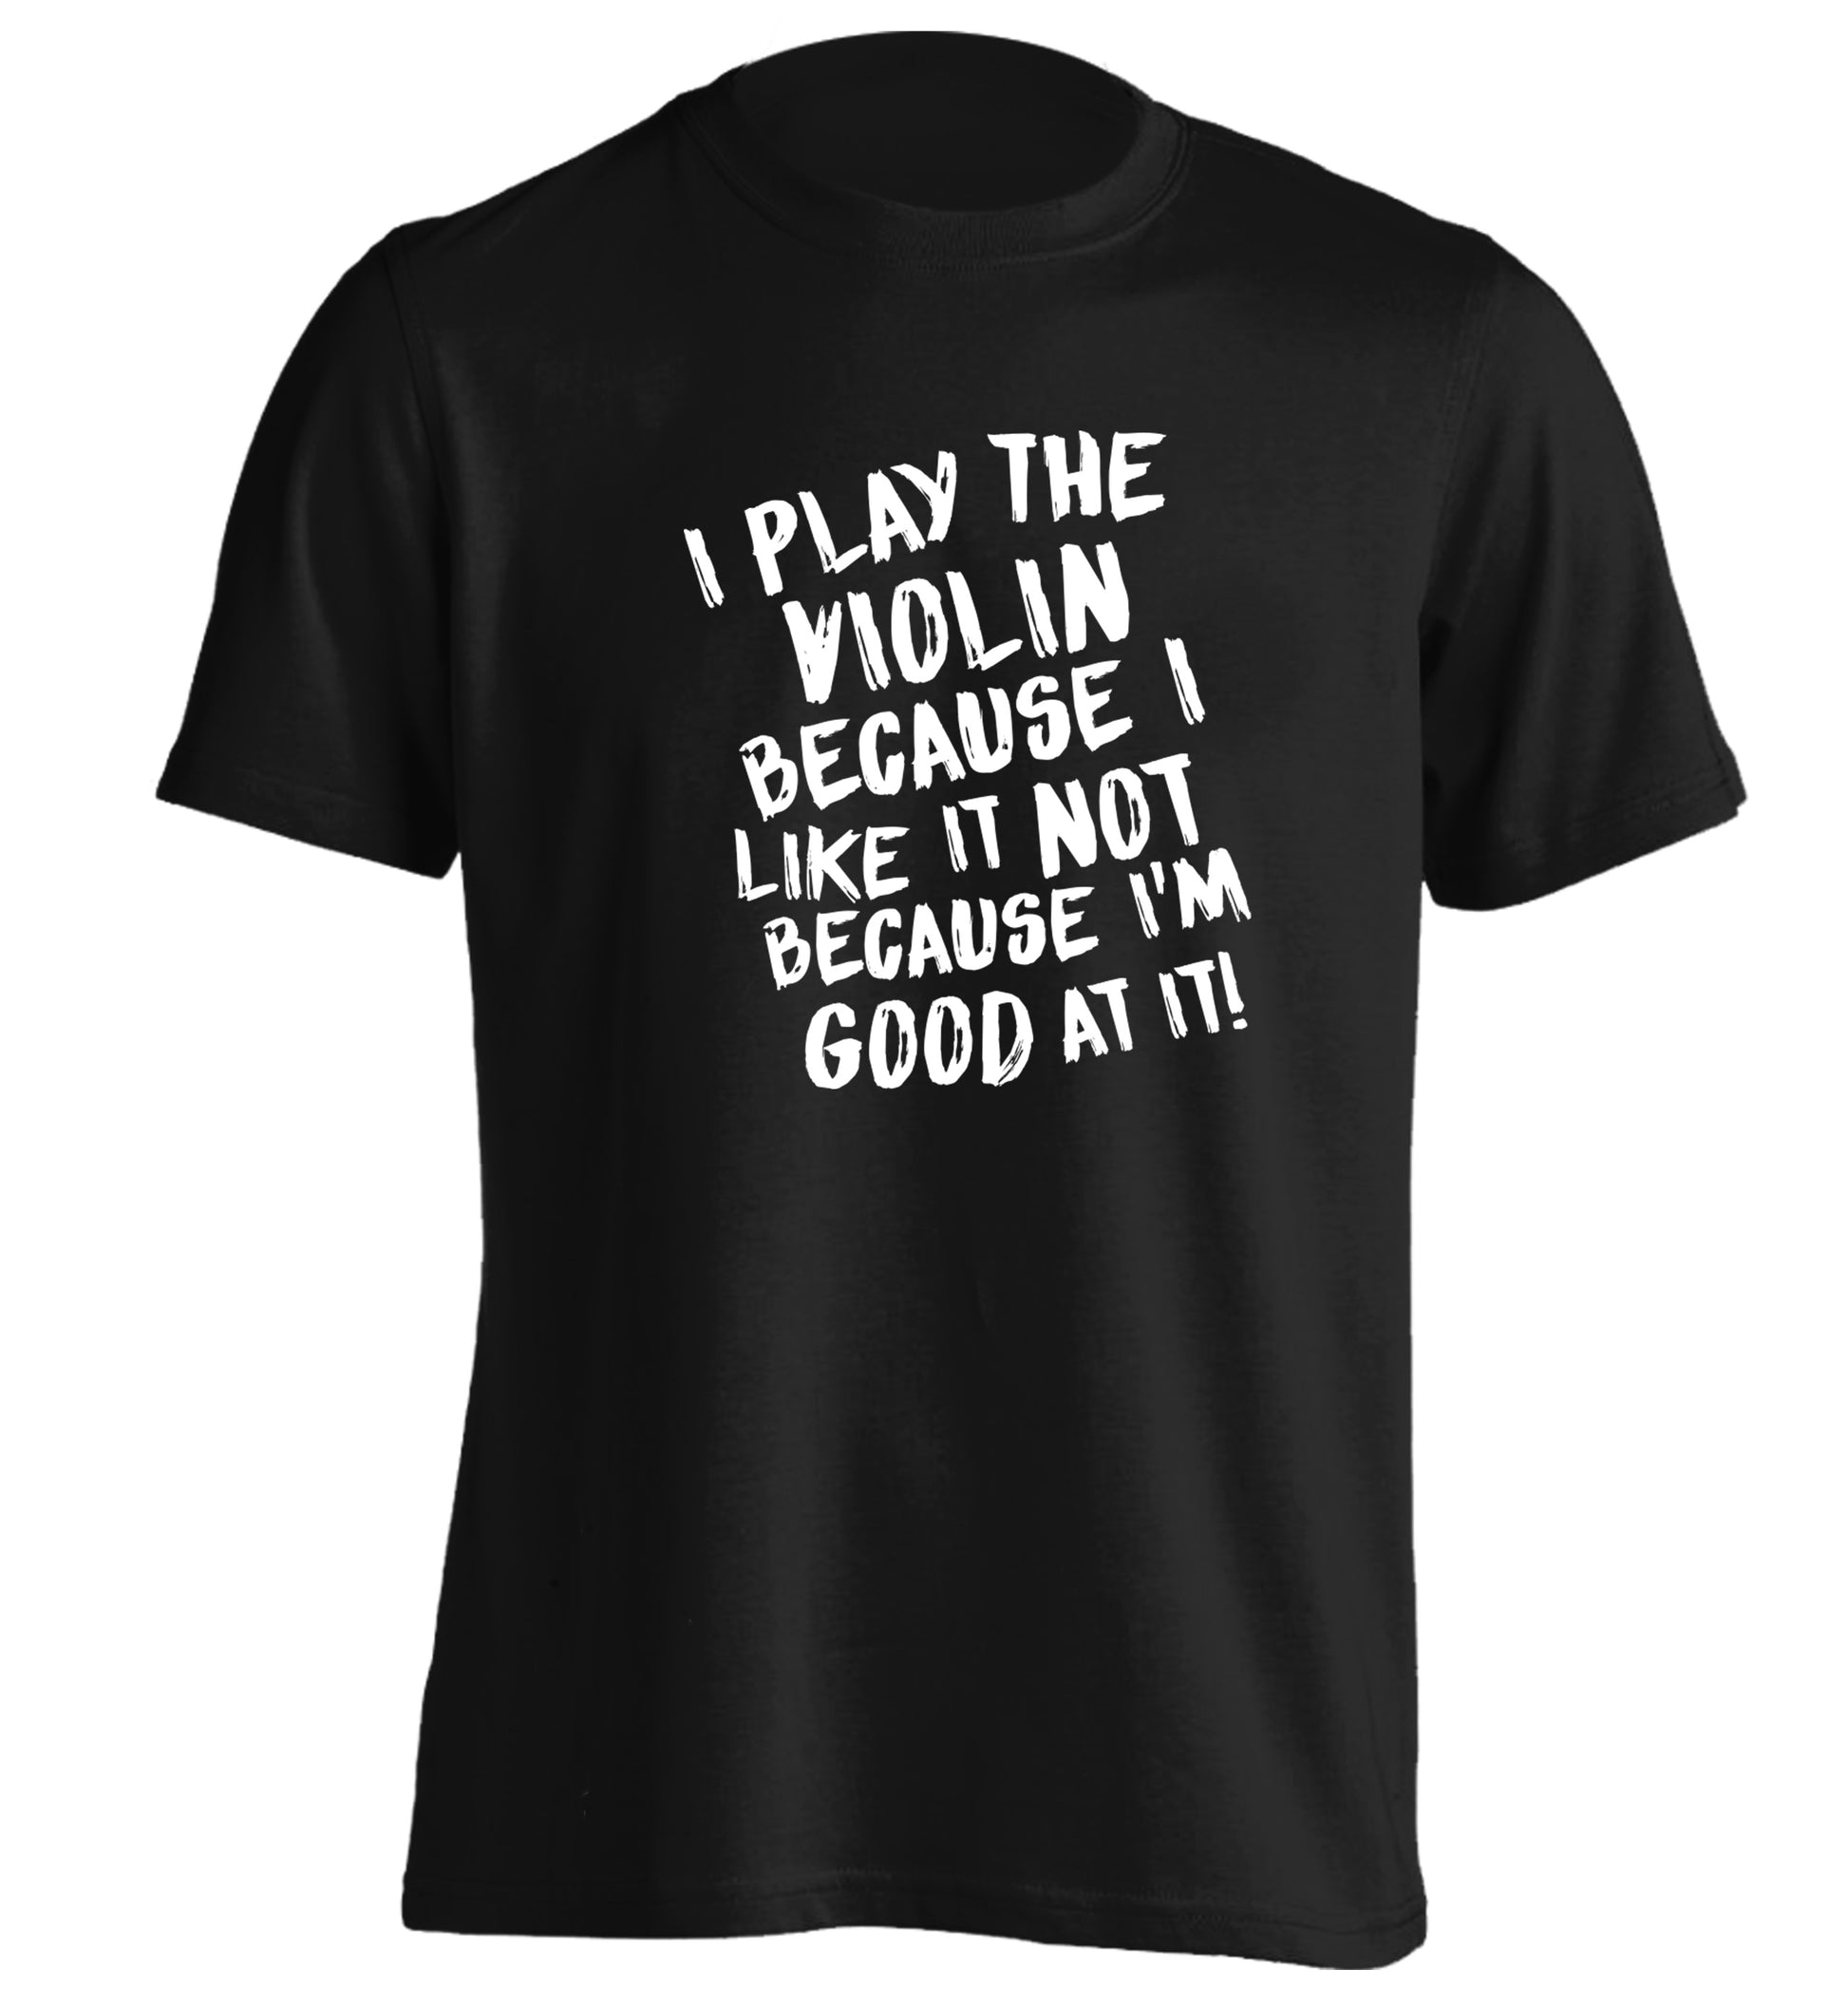 I play the violin because I like it not because I'm good at it adults unisex black Tshirt 2XL